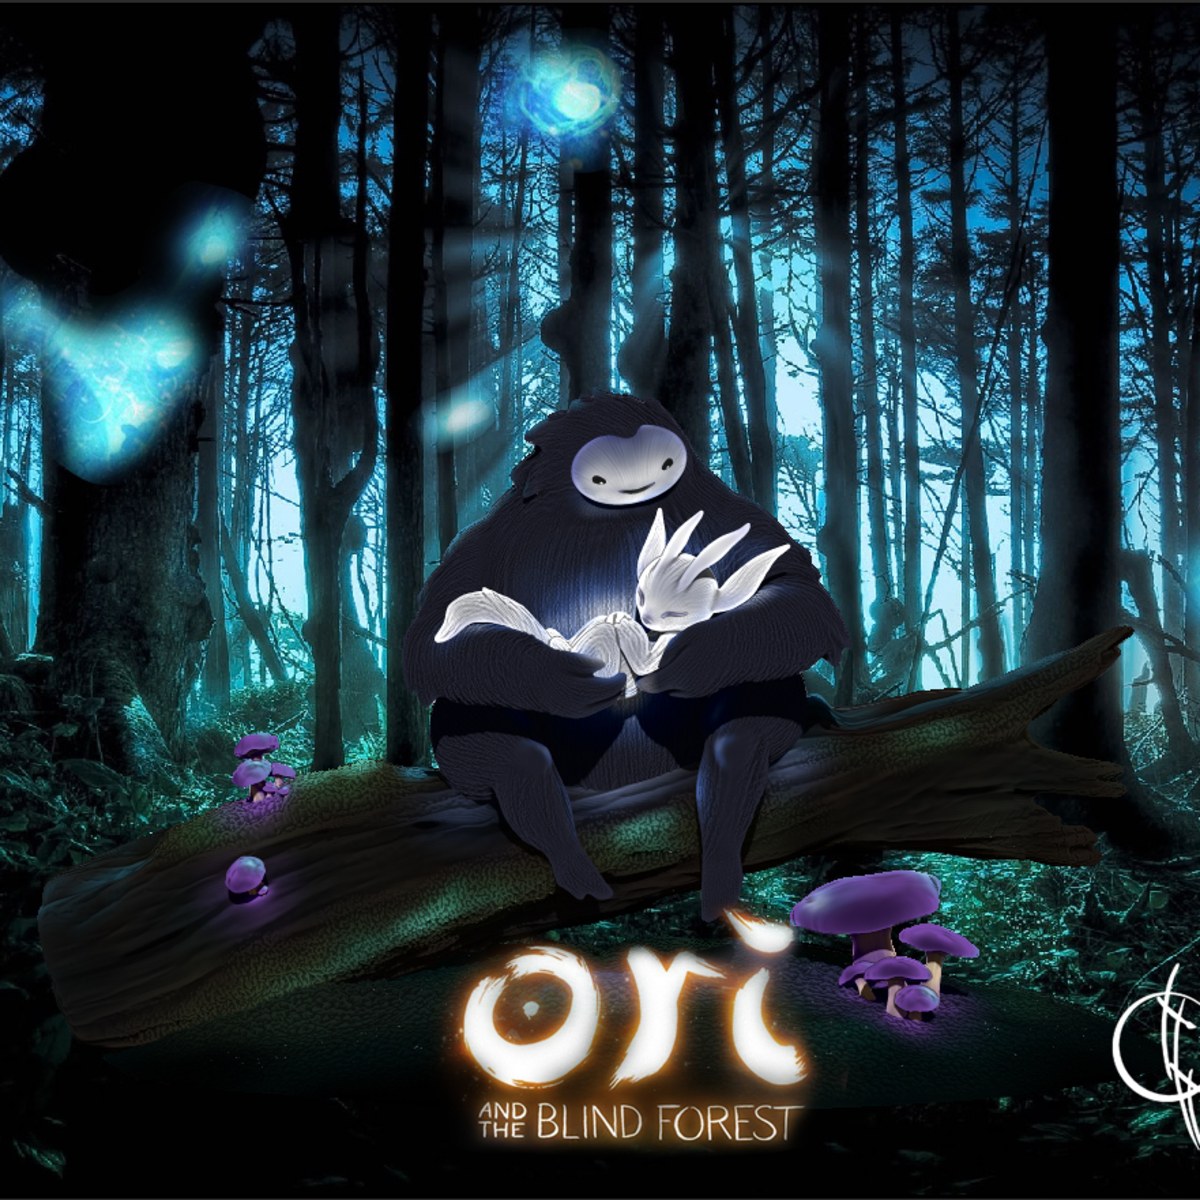 542418 1920x1080 ori and the blind forest  Wallpaper Collection JPG 325 kB   Rare Gallery HD Wallpapers